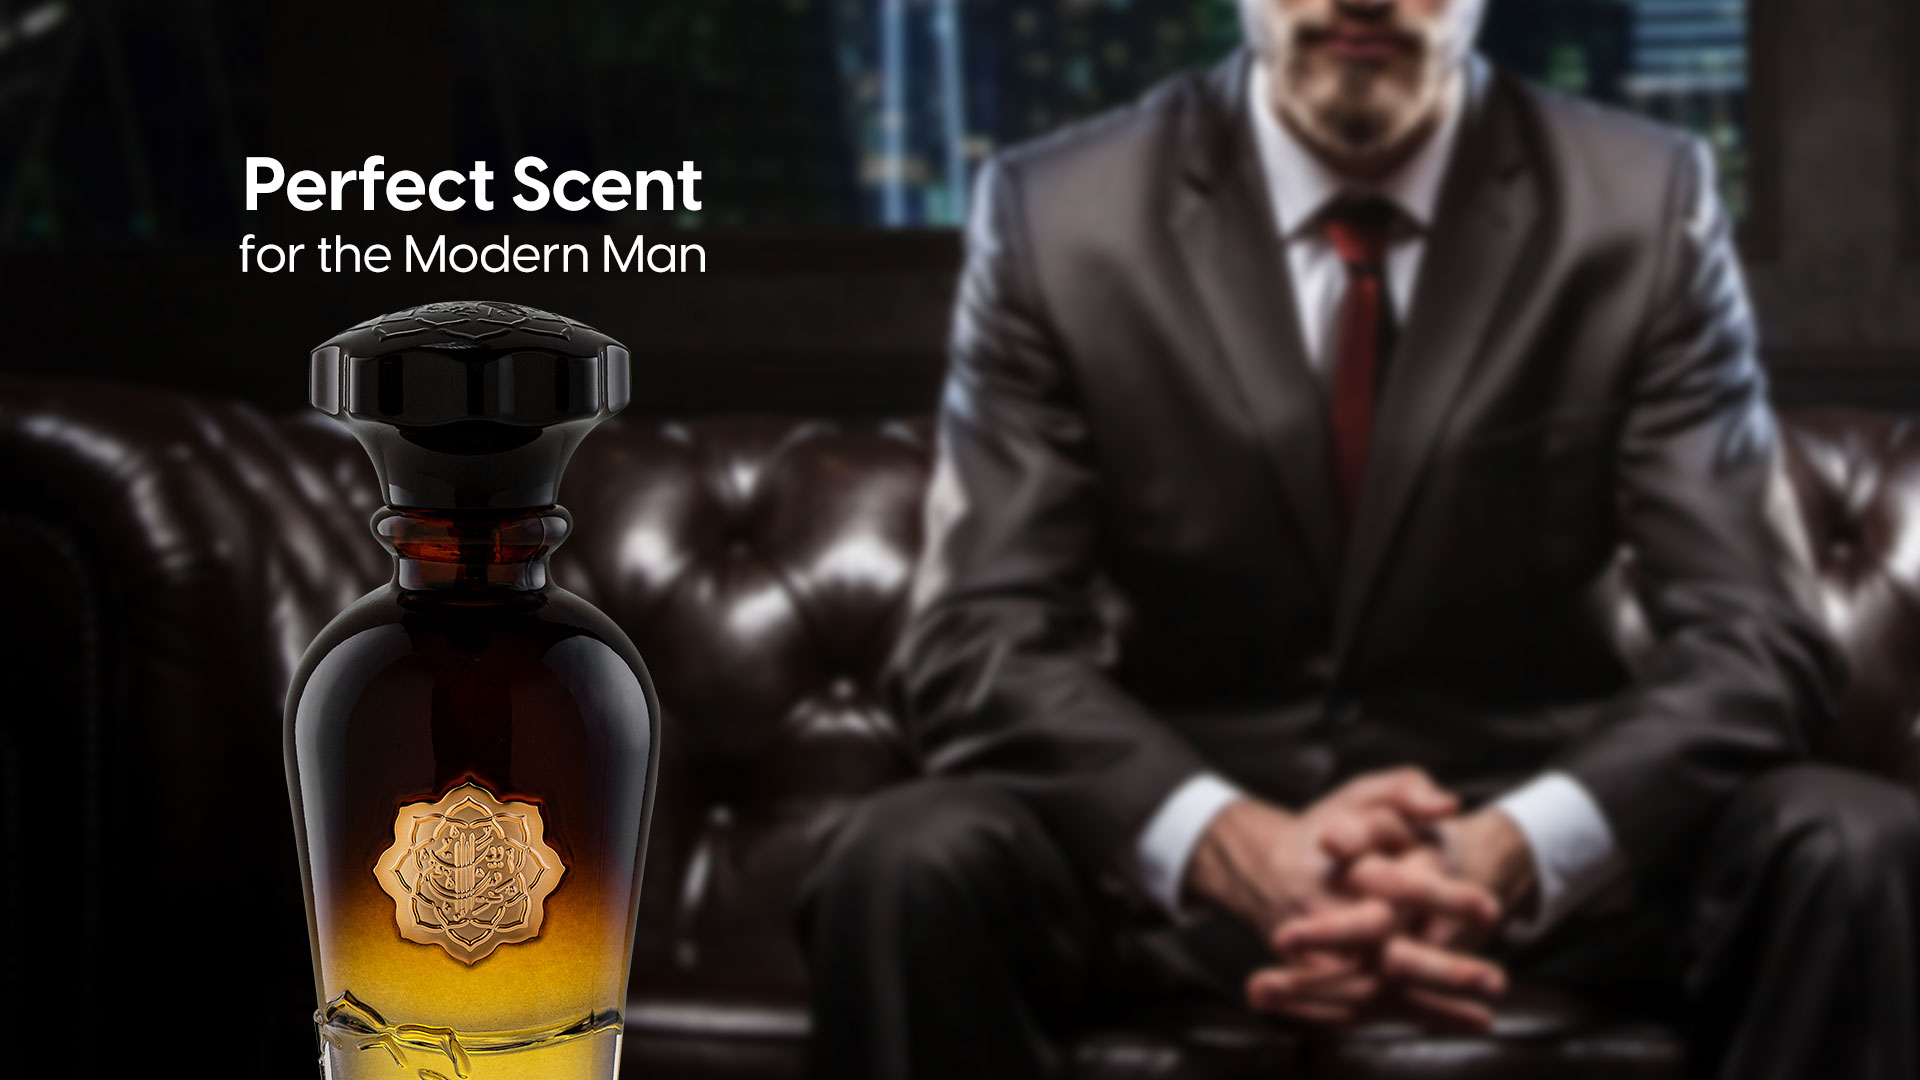 Creed Men's Perfumes Perfect Scent for the Modern Man